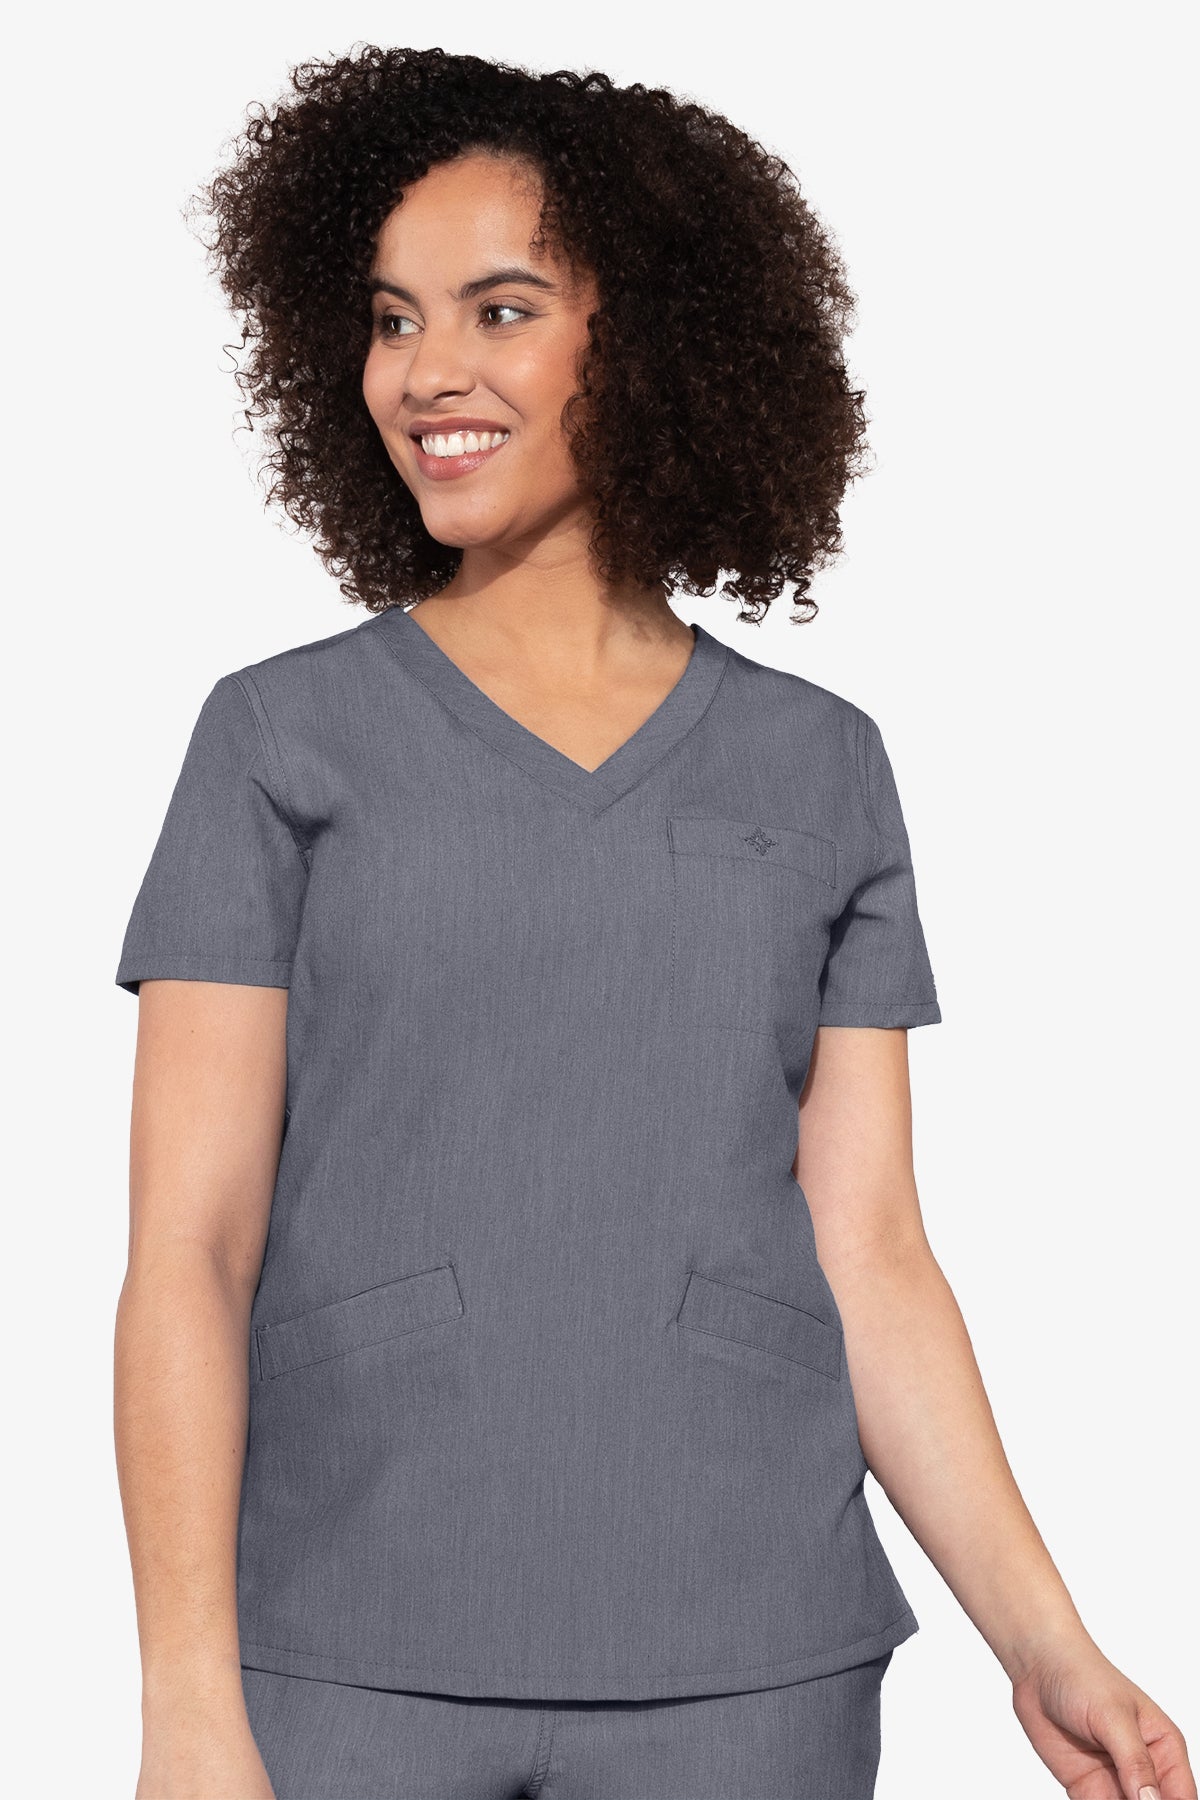 Med Couture Scrub Top Touch Classic V-Neck in Slate at Parker's Clothing and Shoes.